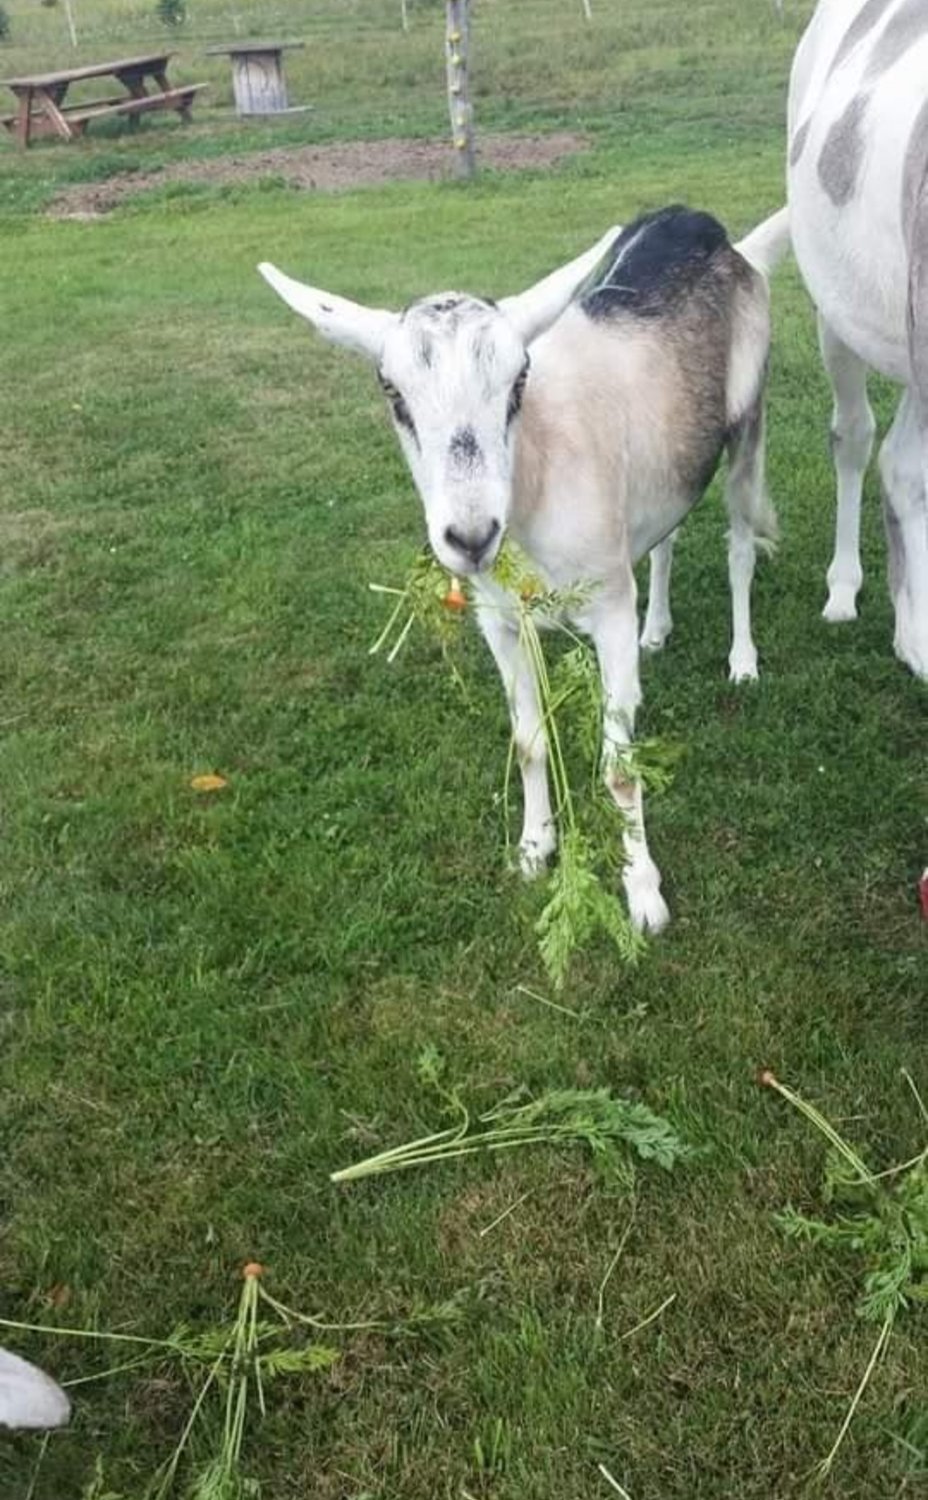 Floyd eats some carrot tops. He resided on our farm for eight years before passing. His favorite snack was whole bananas.